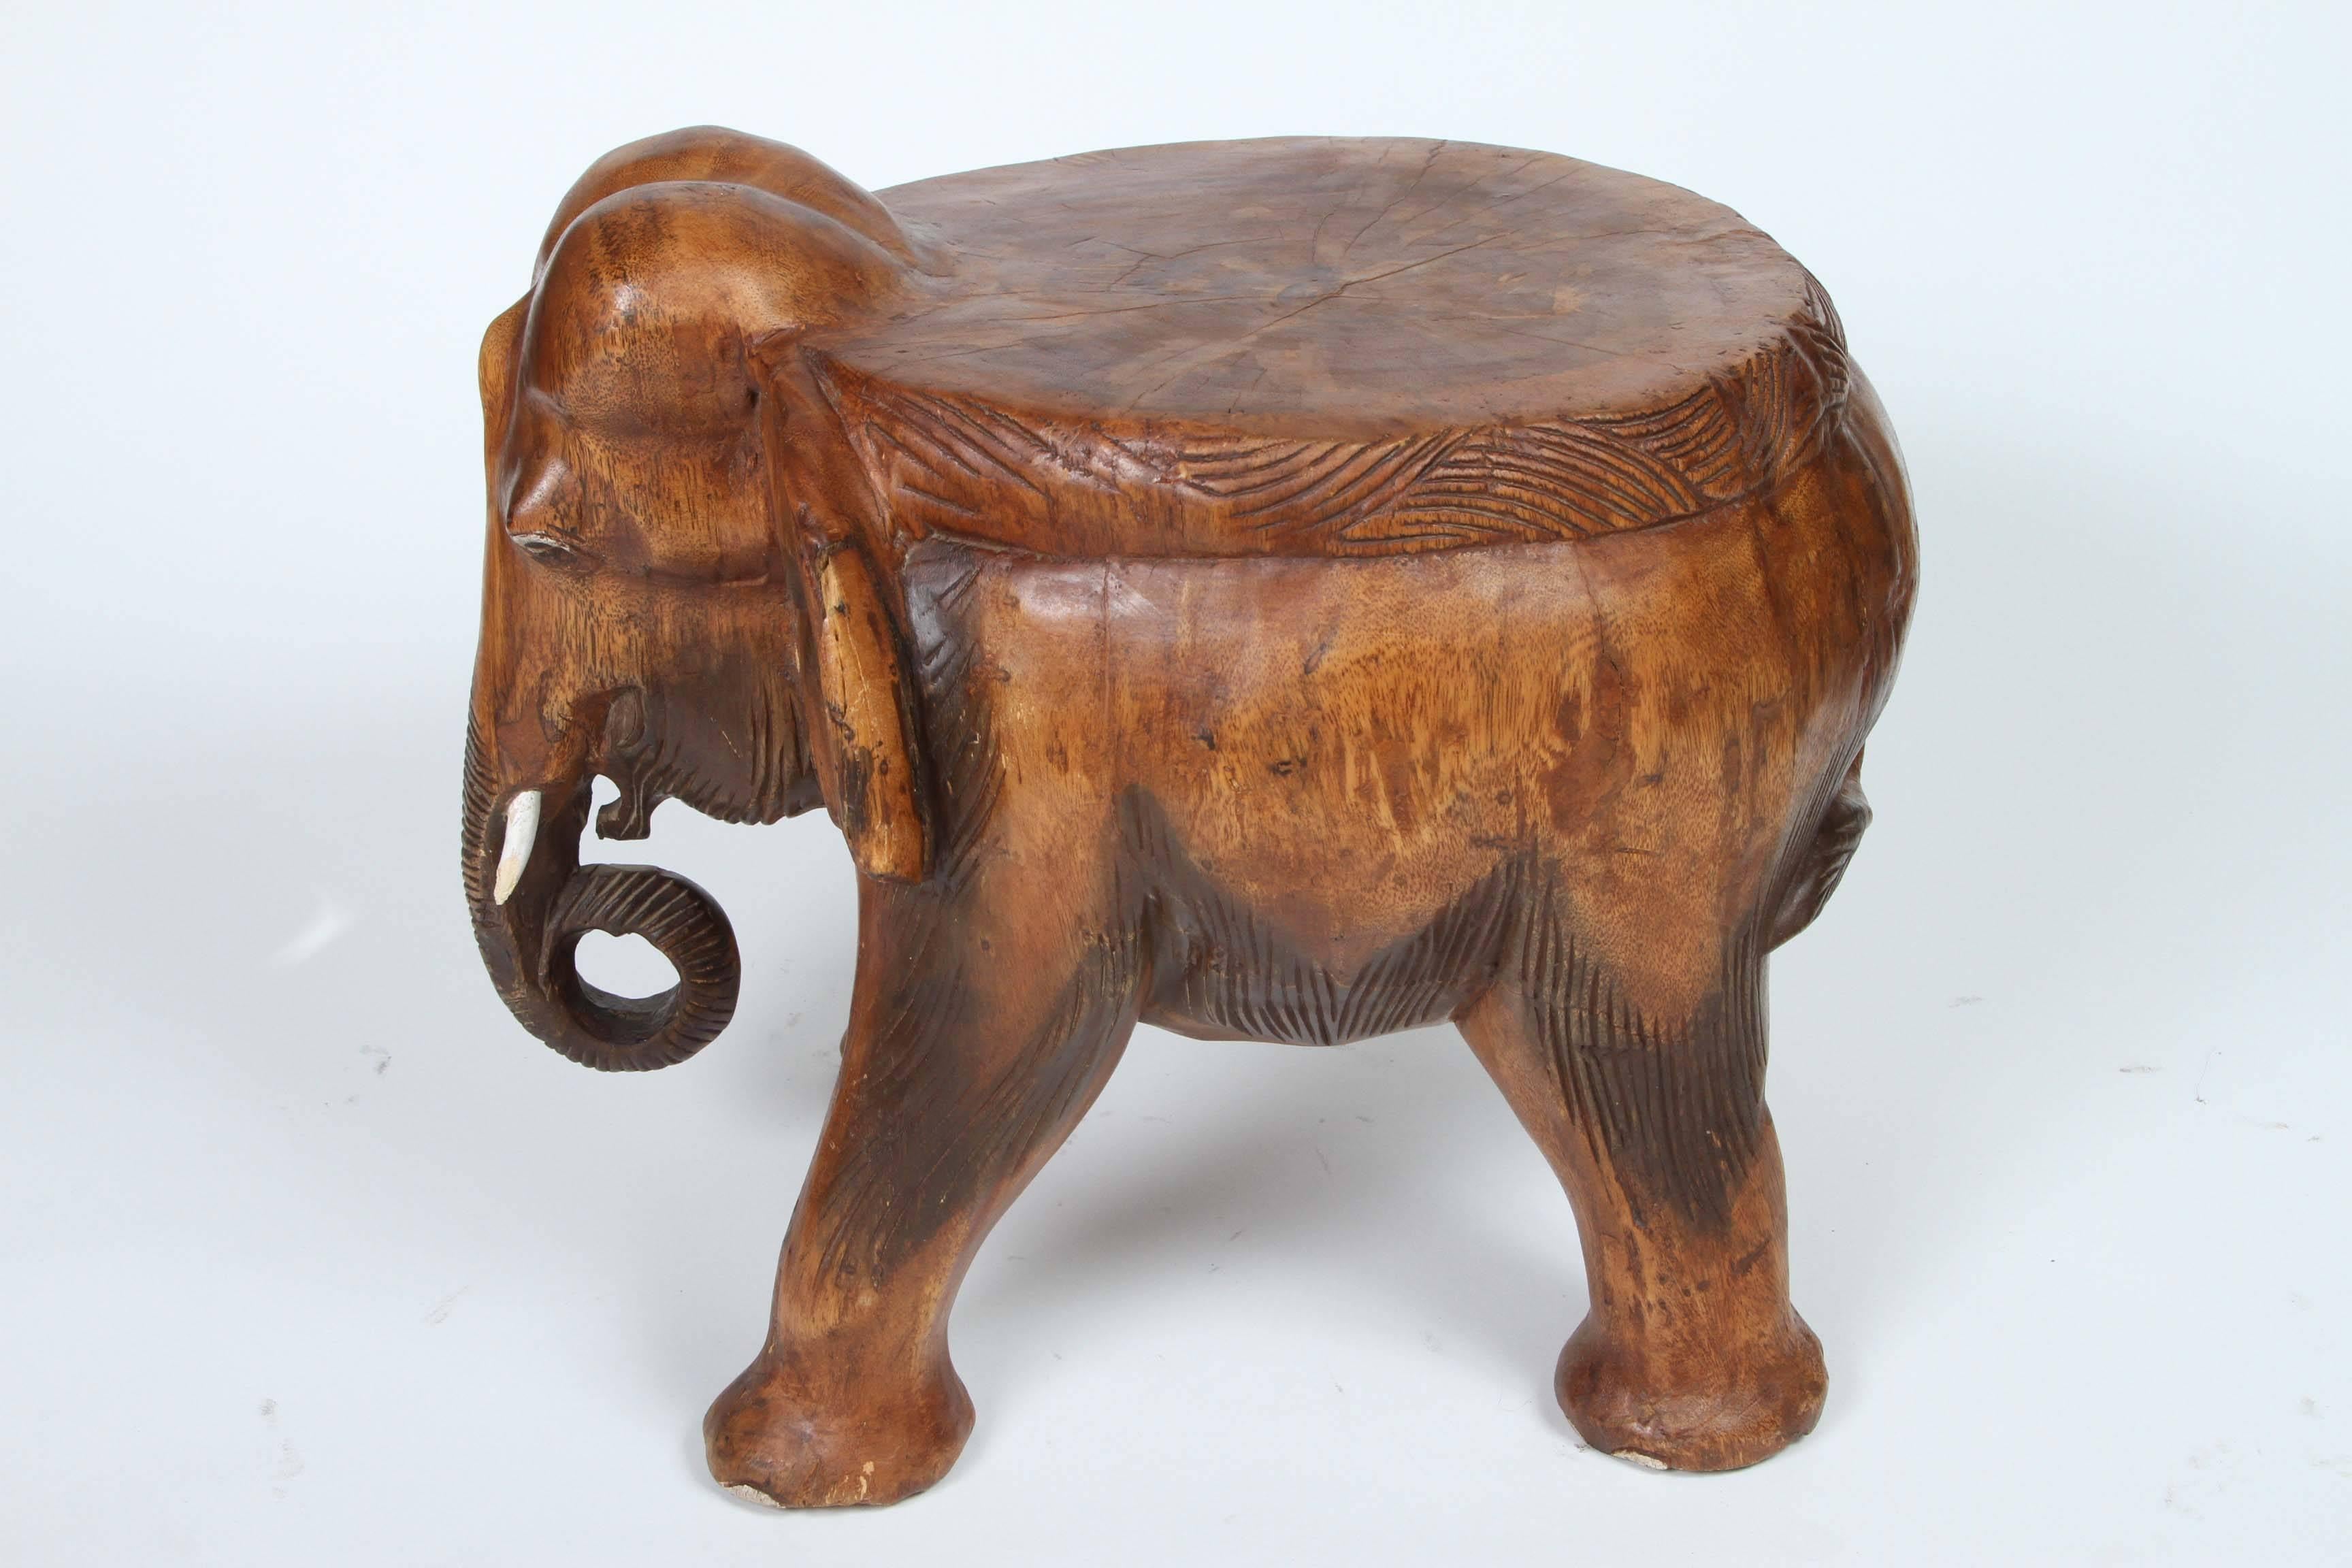 carved wooden stools